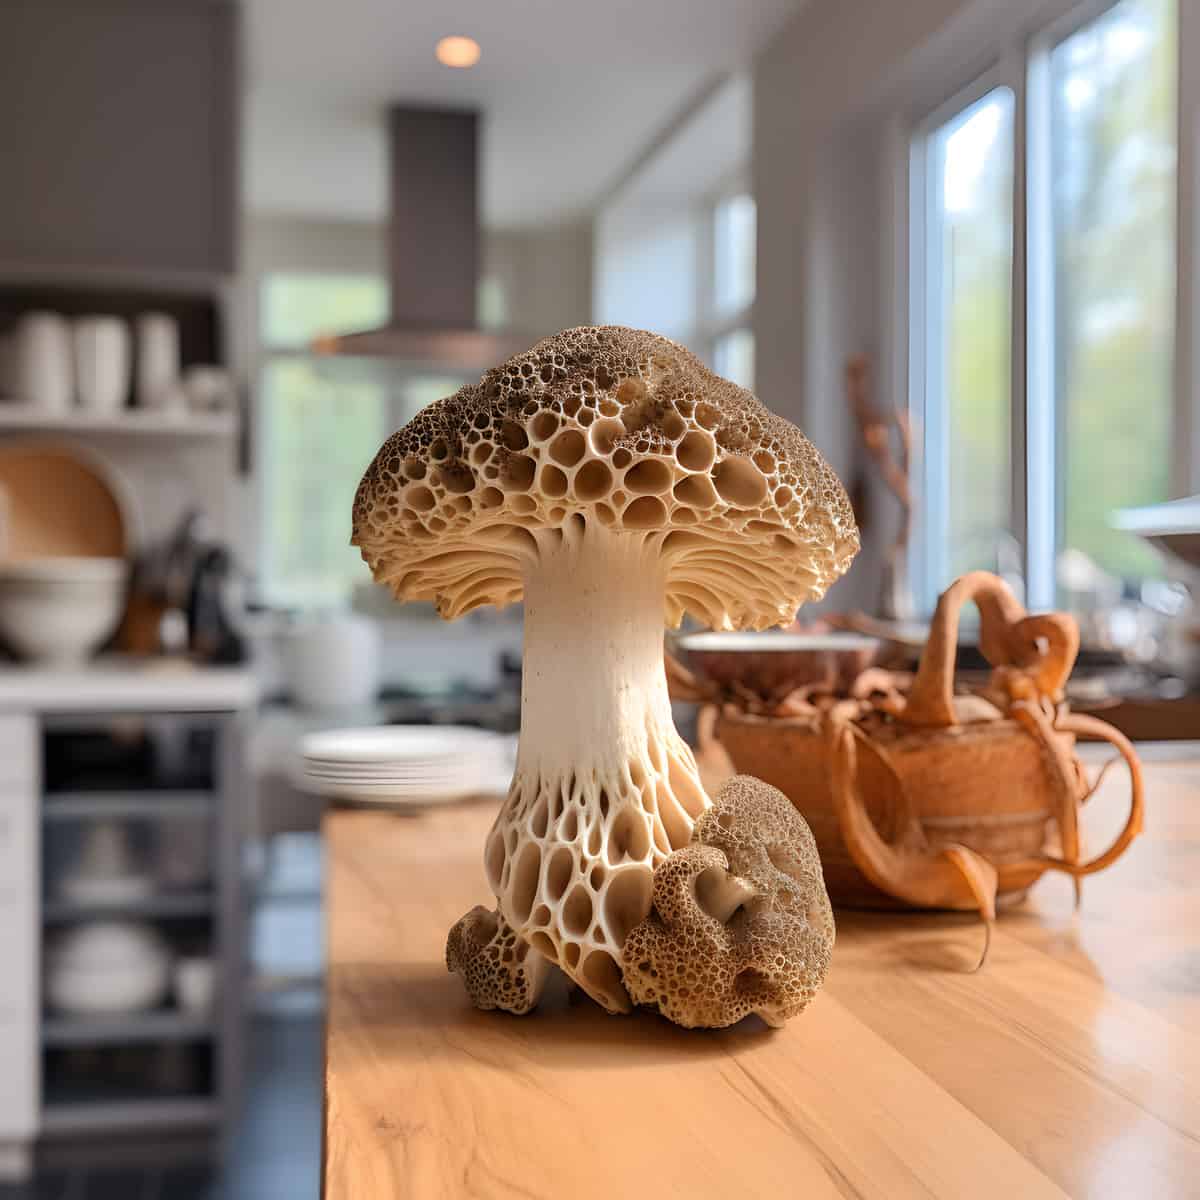 Morel Mushrooms on a kitchen counter